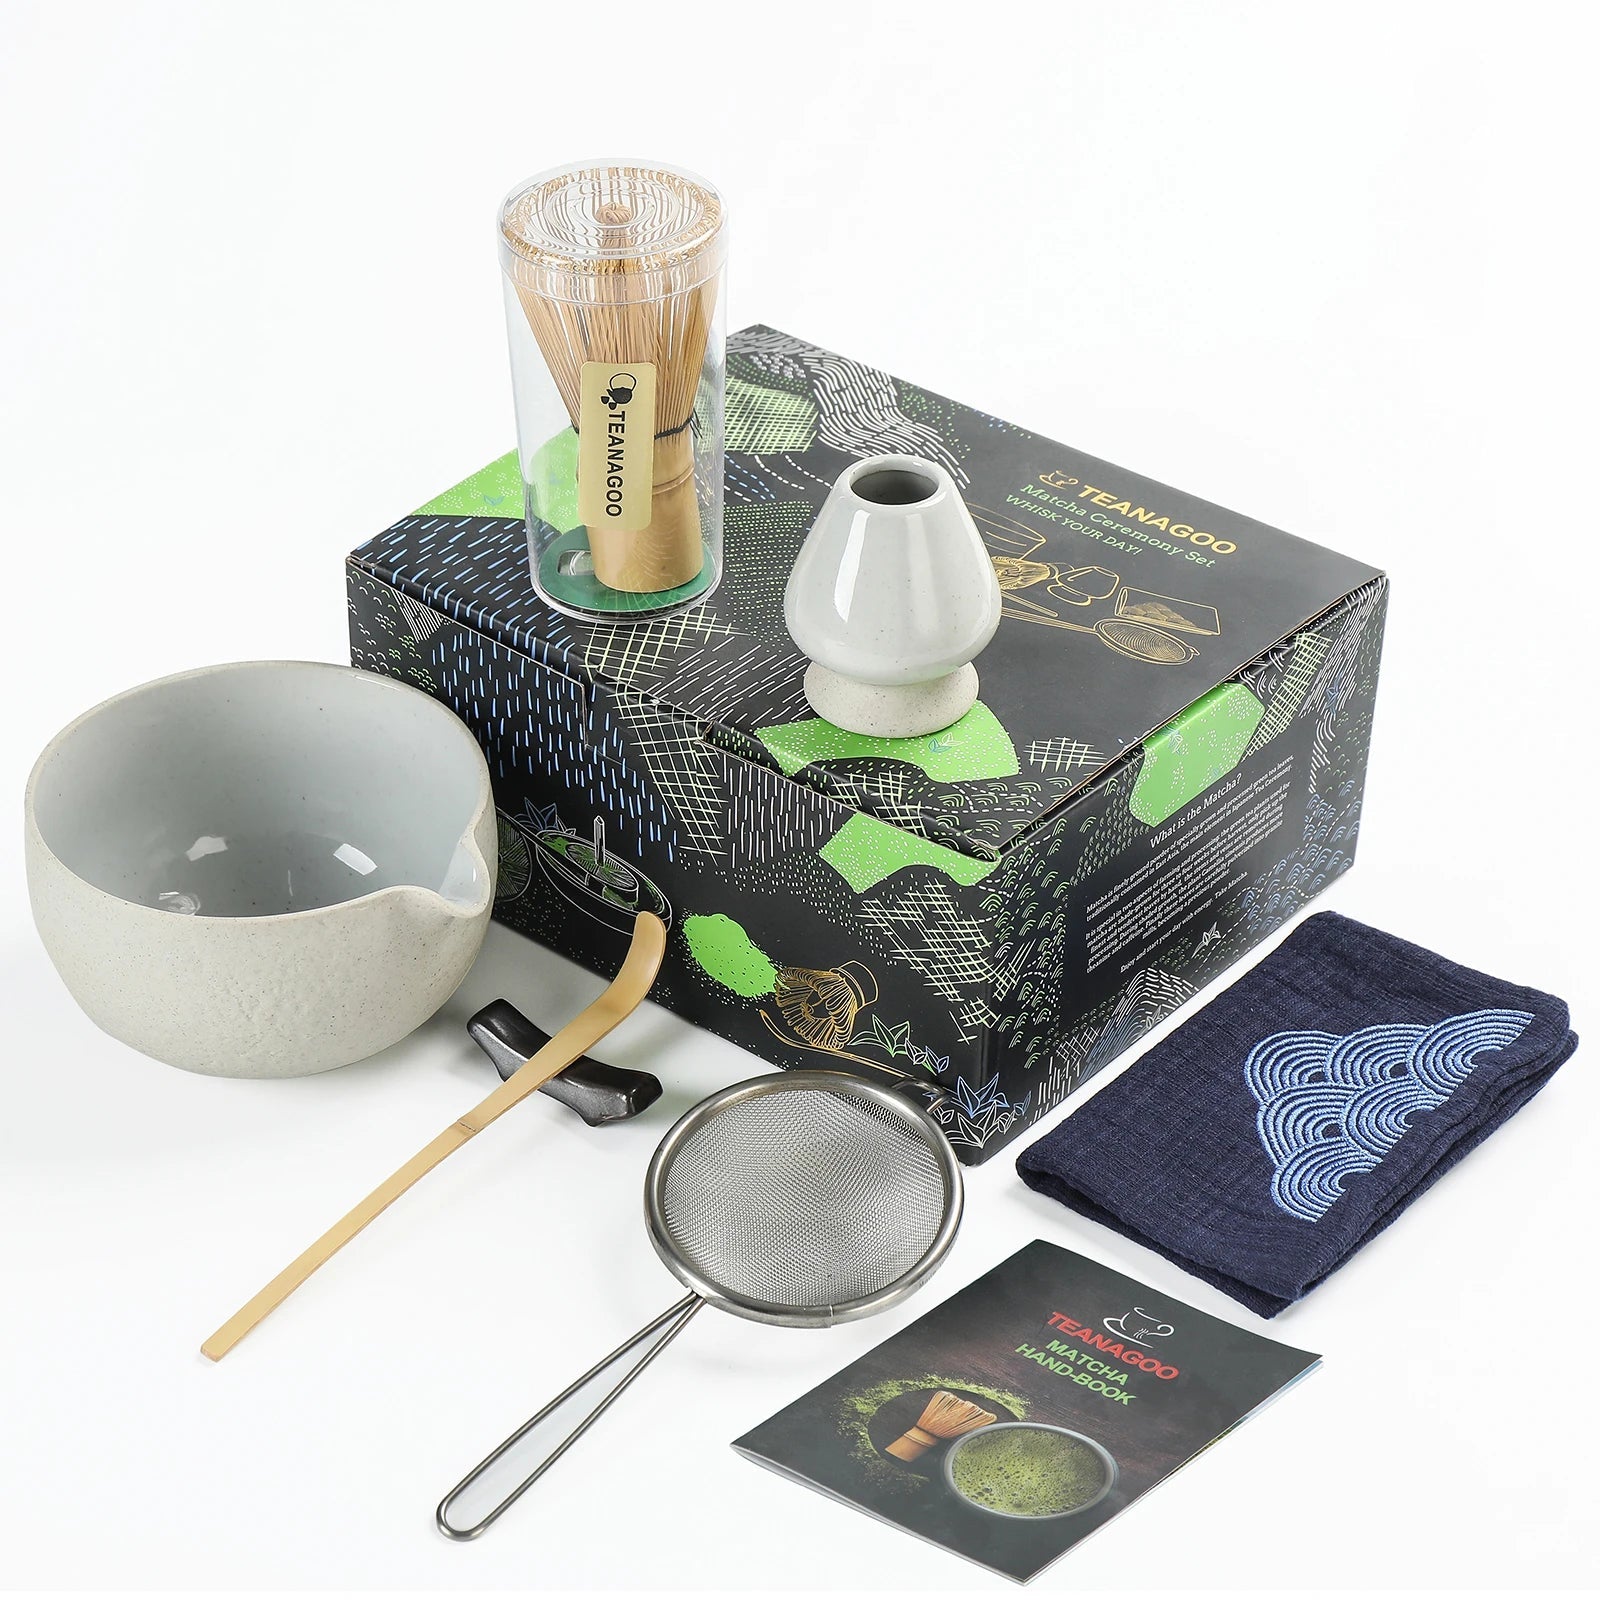 Japanese Matcha Ceremony Set, 8pcs/set with Paper Hand-Book, Bowl with Pouring Spout